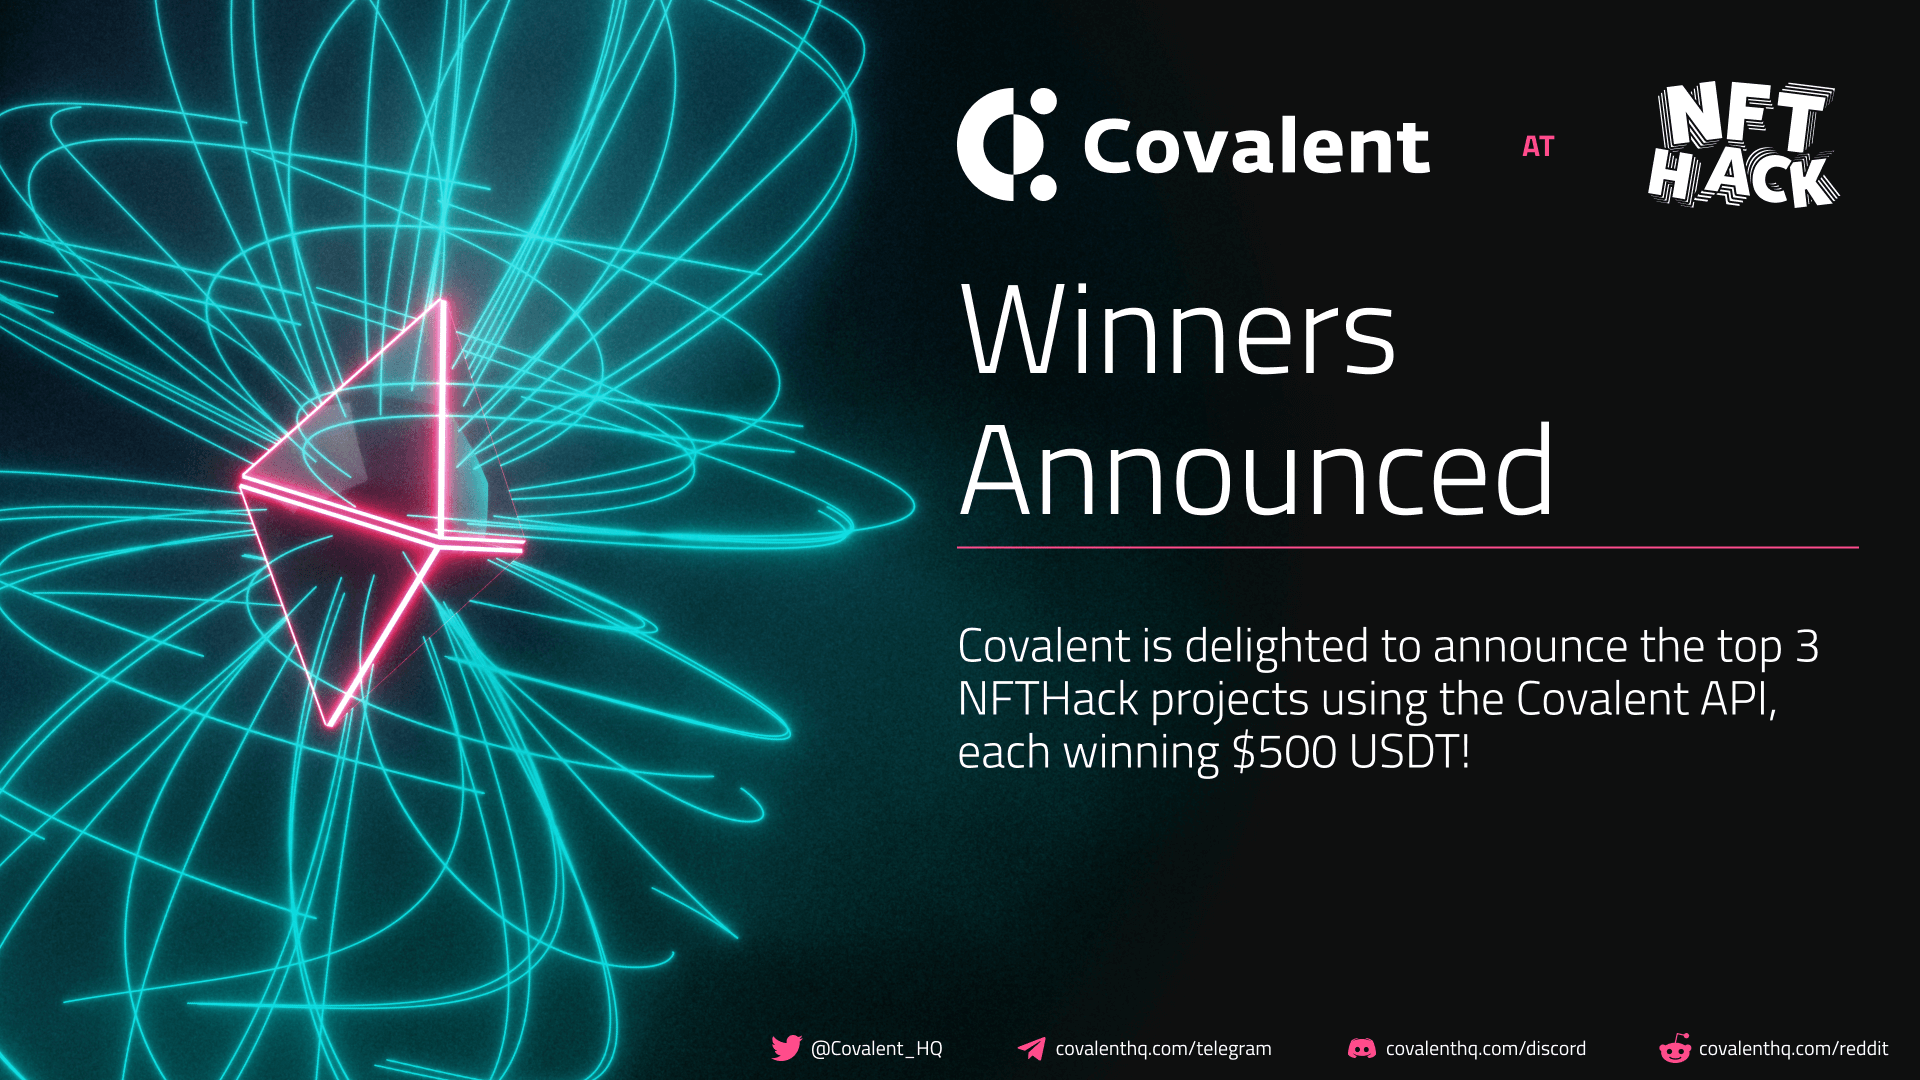 Covalent at NFTHack: Winners Announced